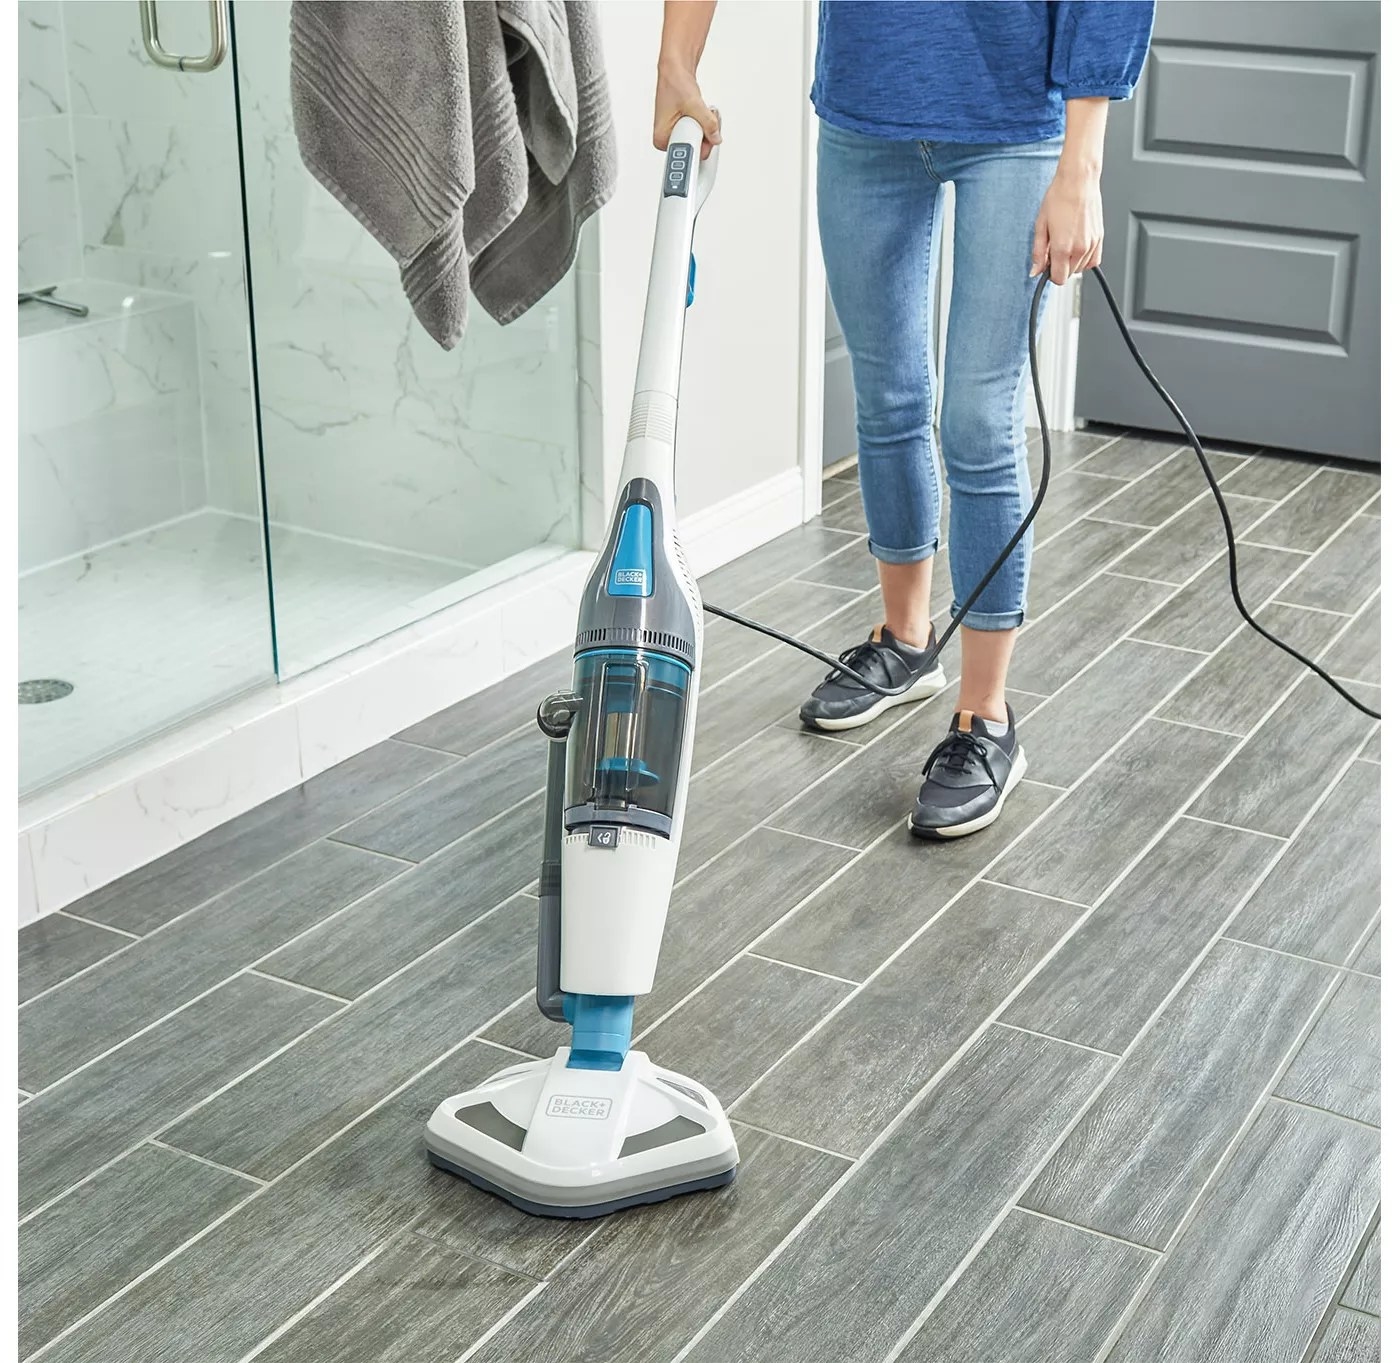 The white, blue, and gray Black and Decker steam mop and upright vacuum